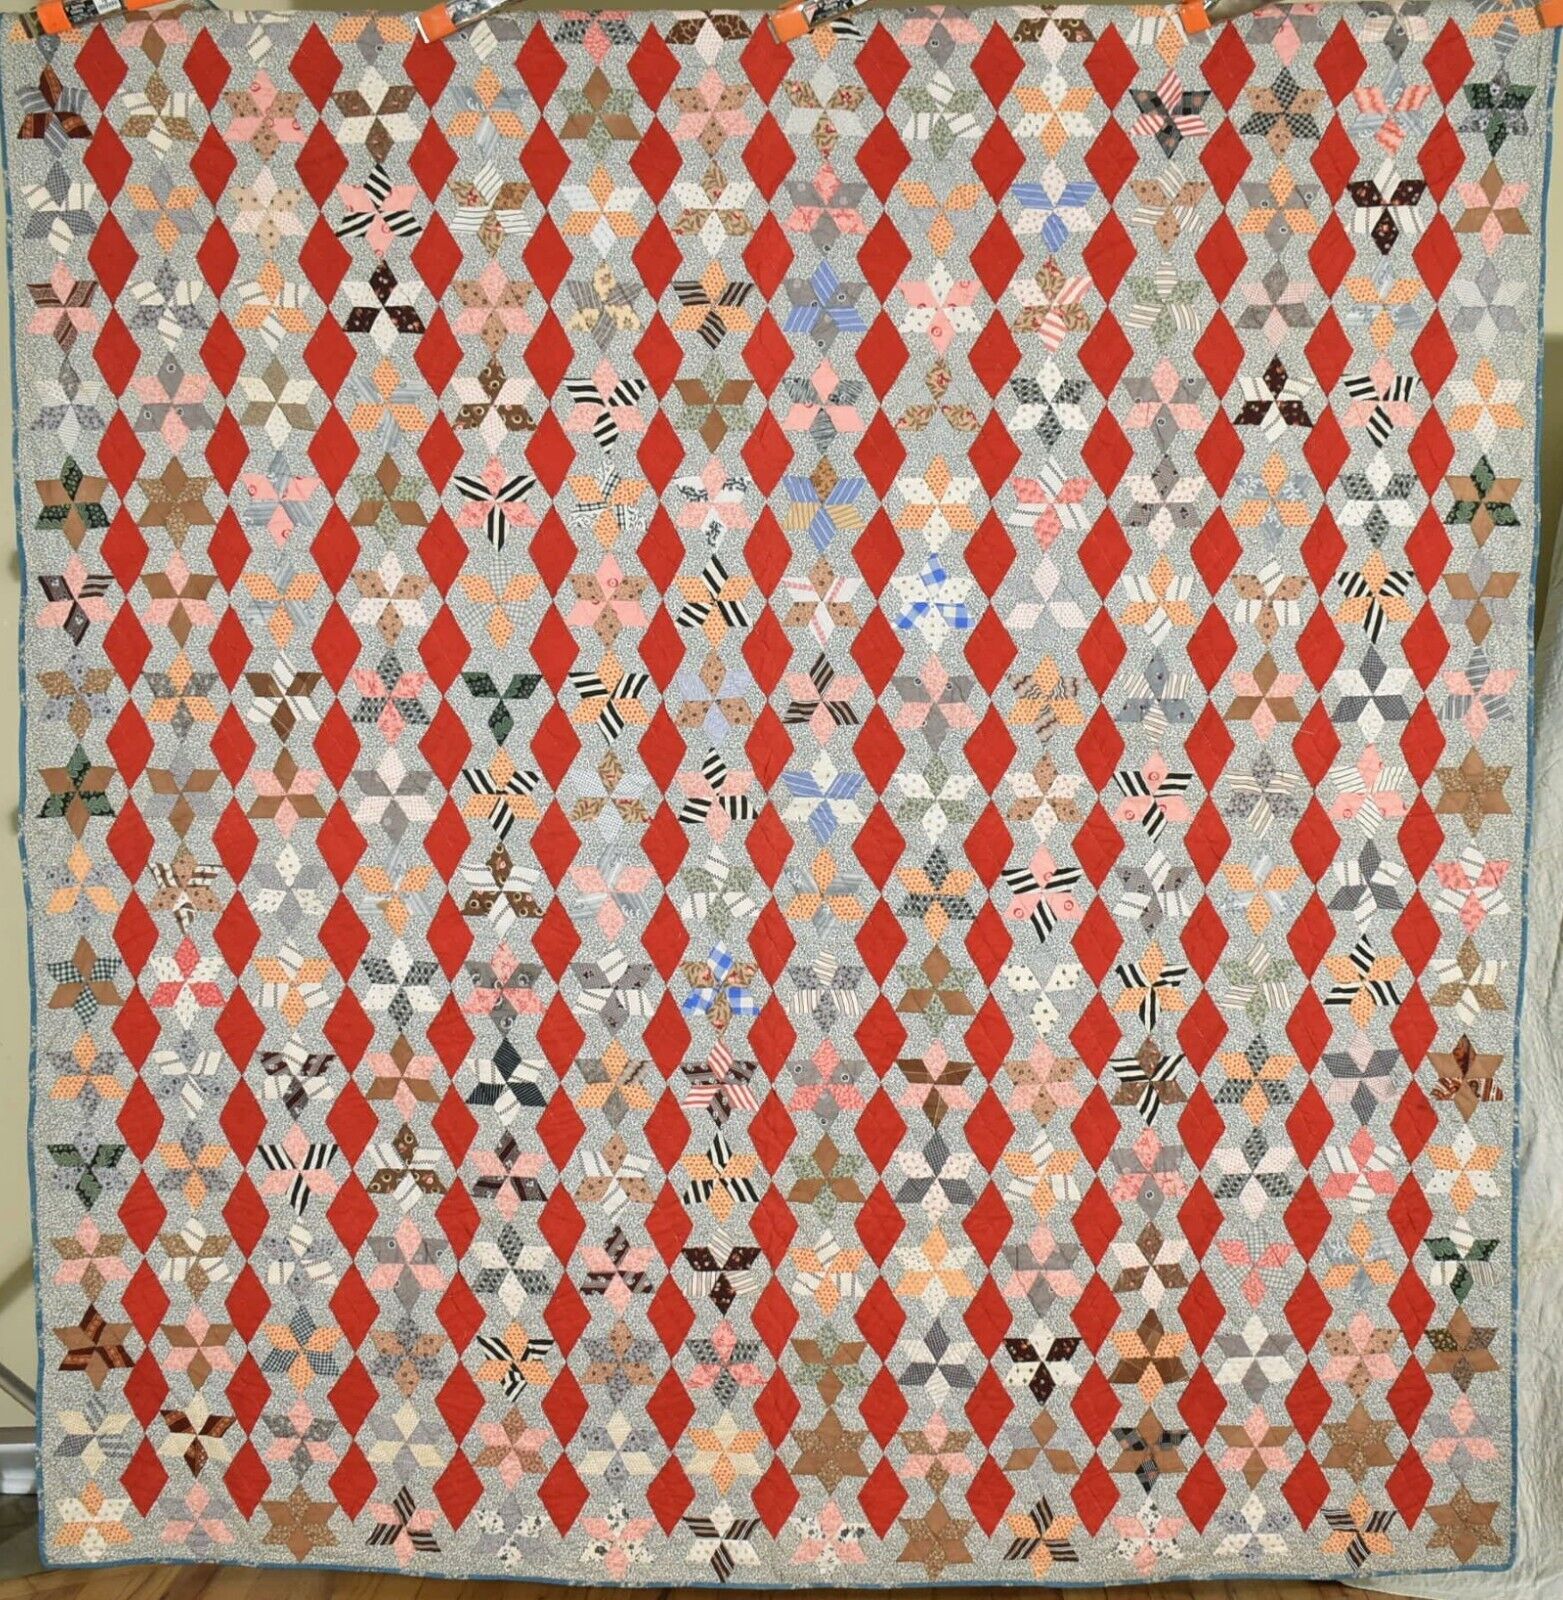 OUTSTANDING Vintage 1870's Stars & Diamonds Antique Quilt ~NICE SMALL SCALE